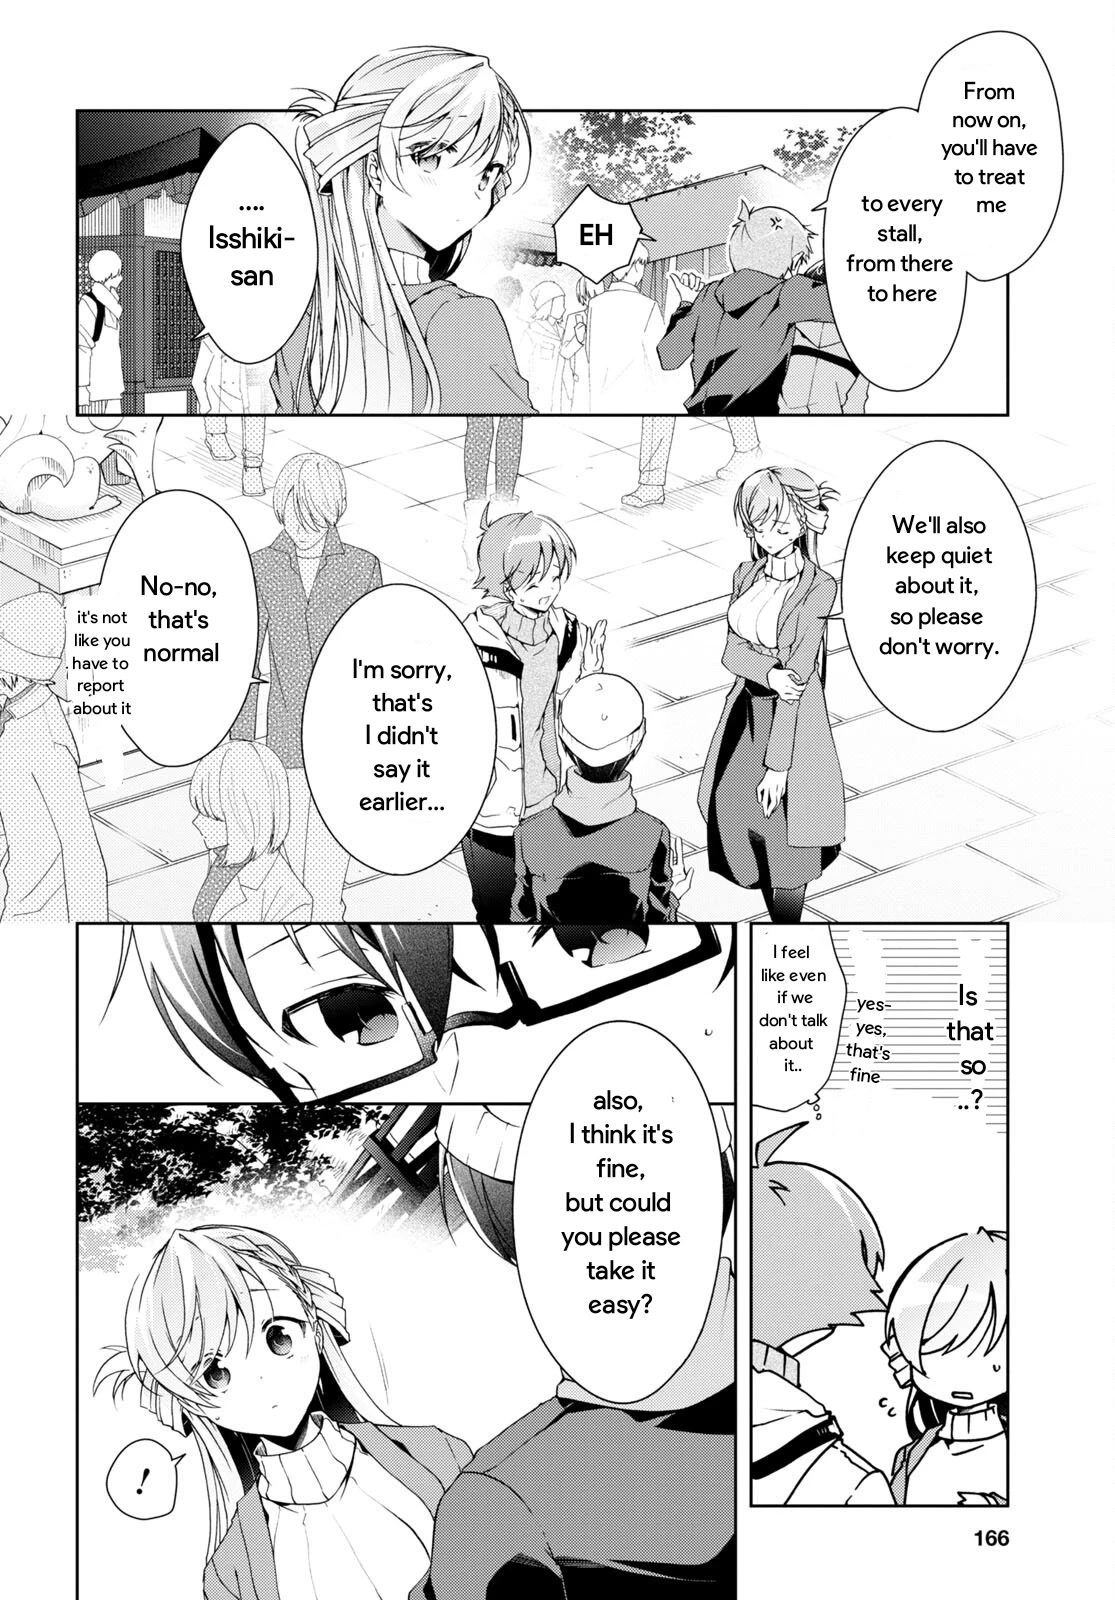 Isshiki-san Wants to Know About Love. - chapter 24.2 - #5